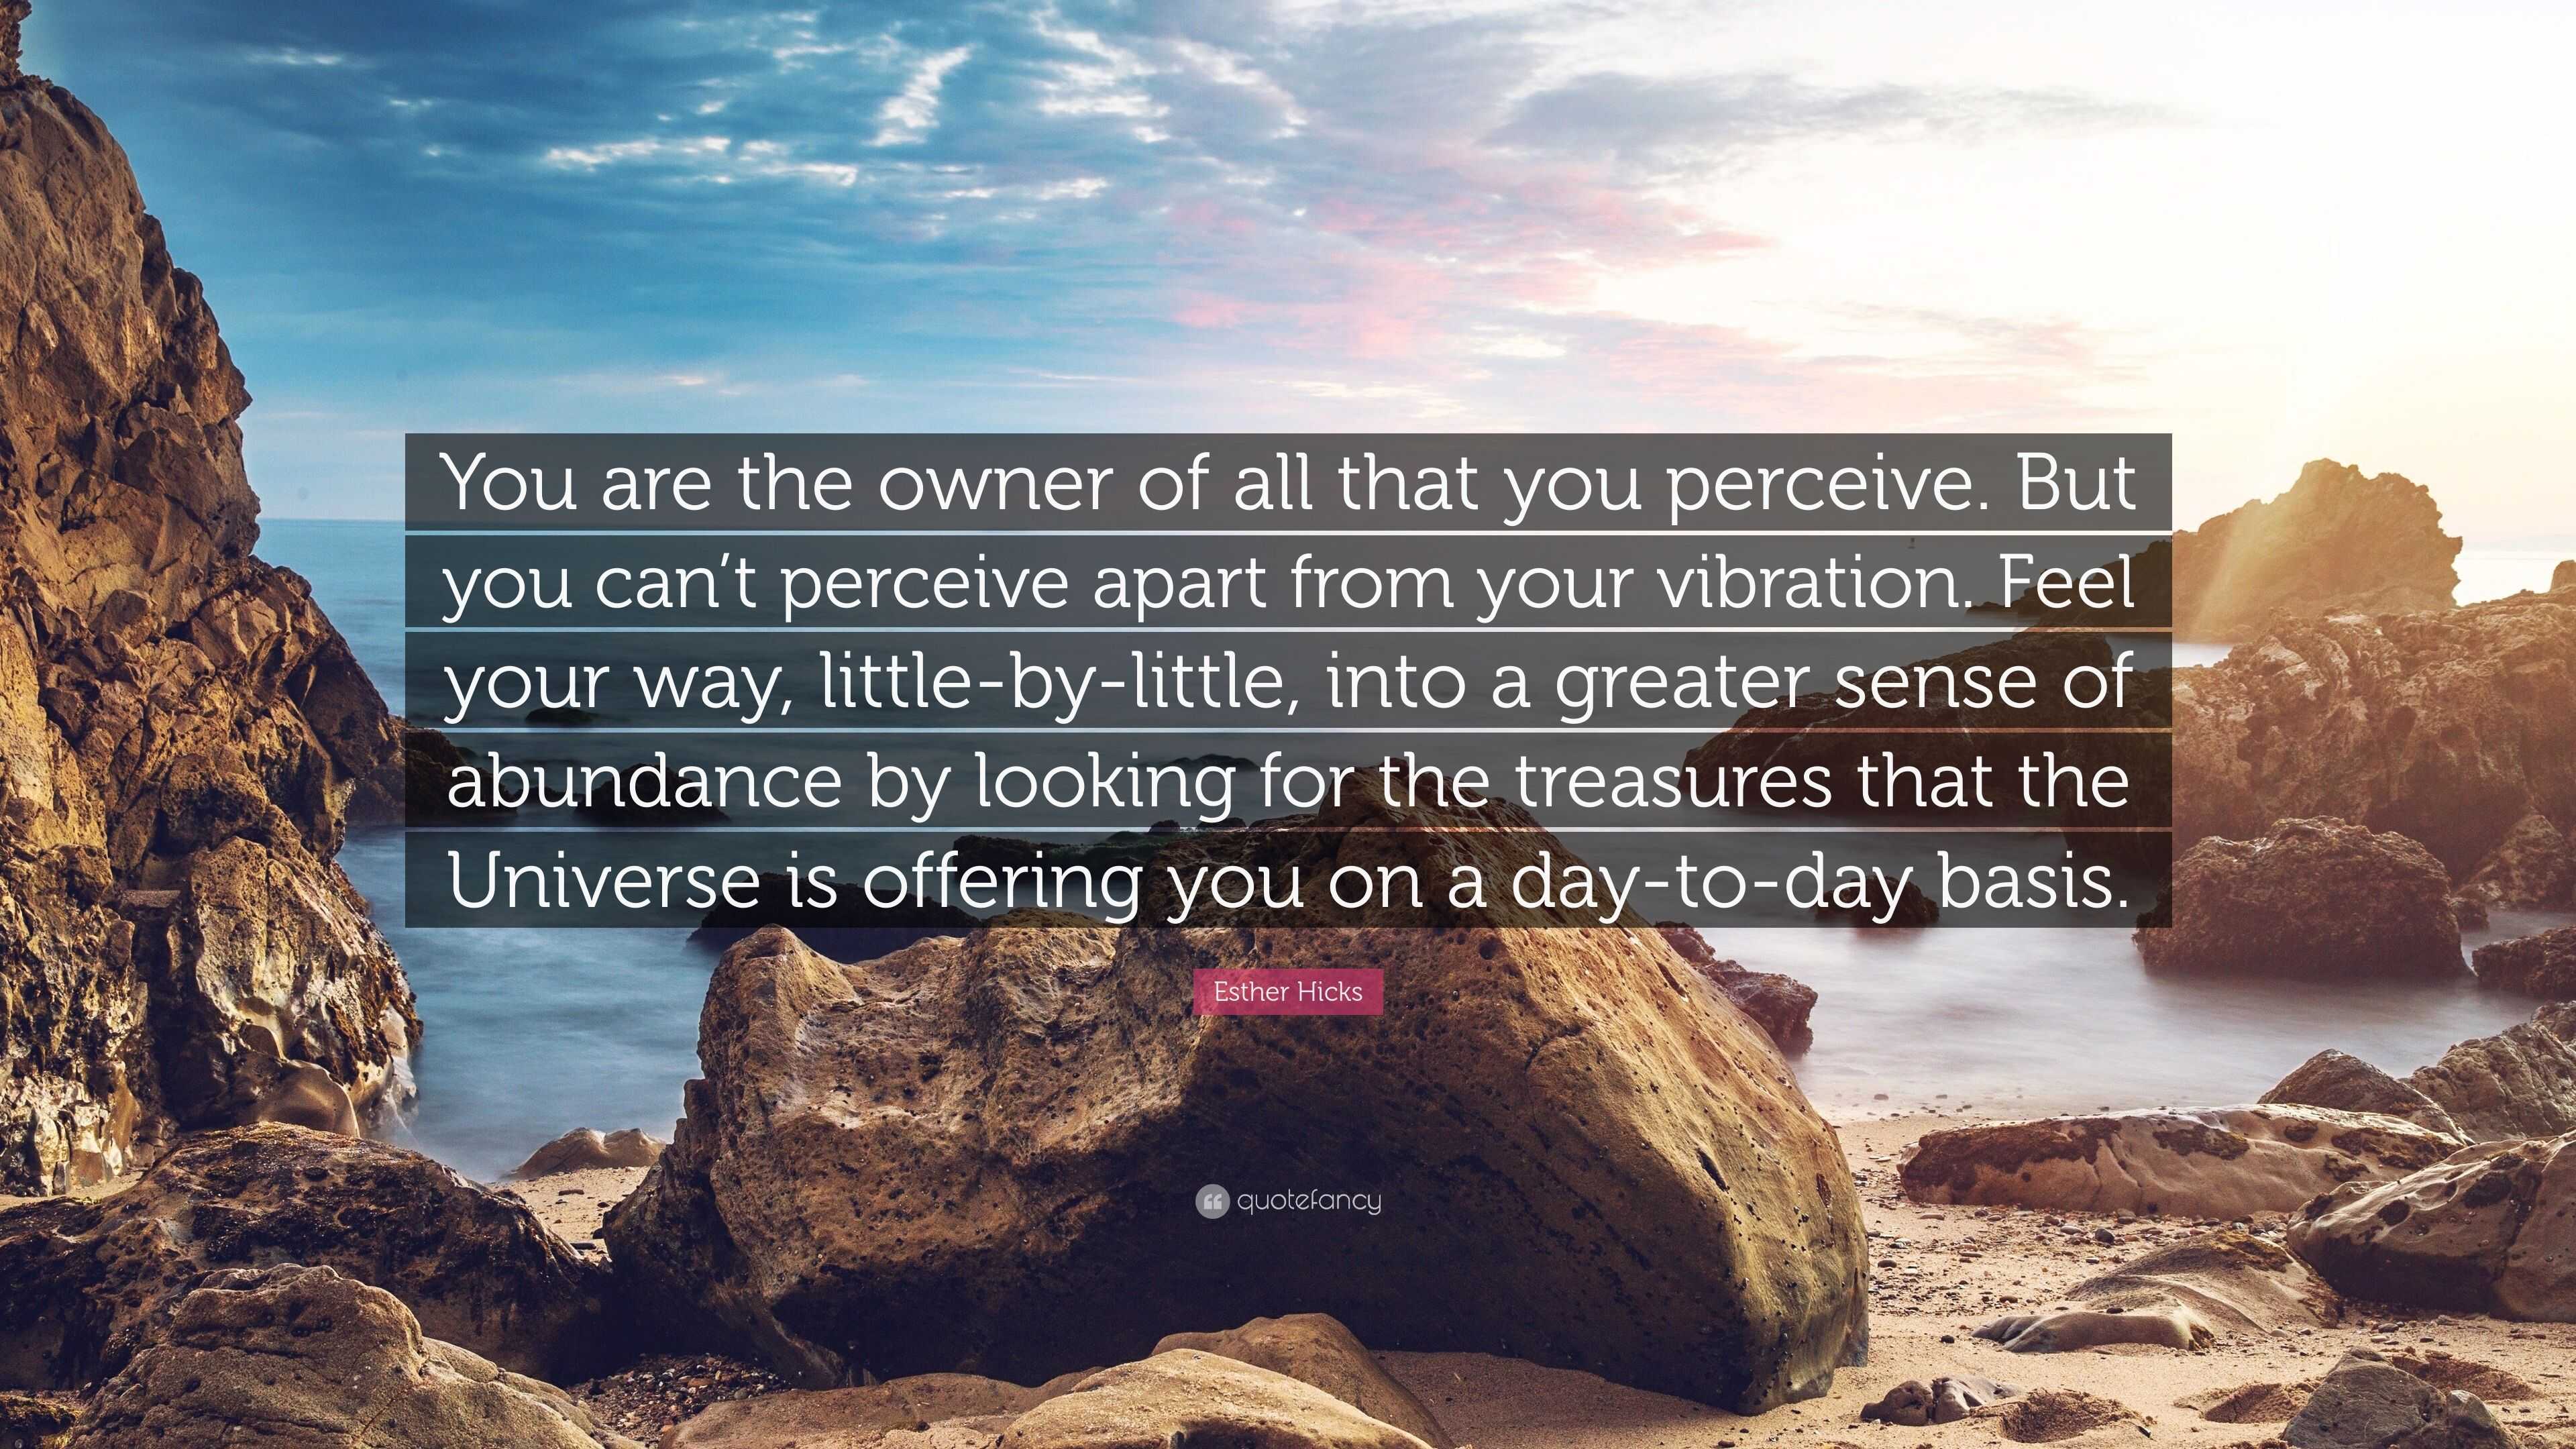 Esther Hicks Quote: “You are the owner of all that you perceive. But you  can't perceive apart from your vibration. Feel your way, little-by-l...”